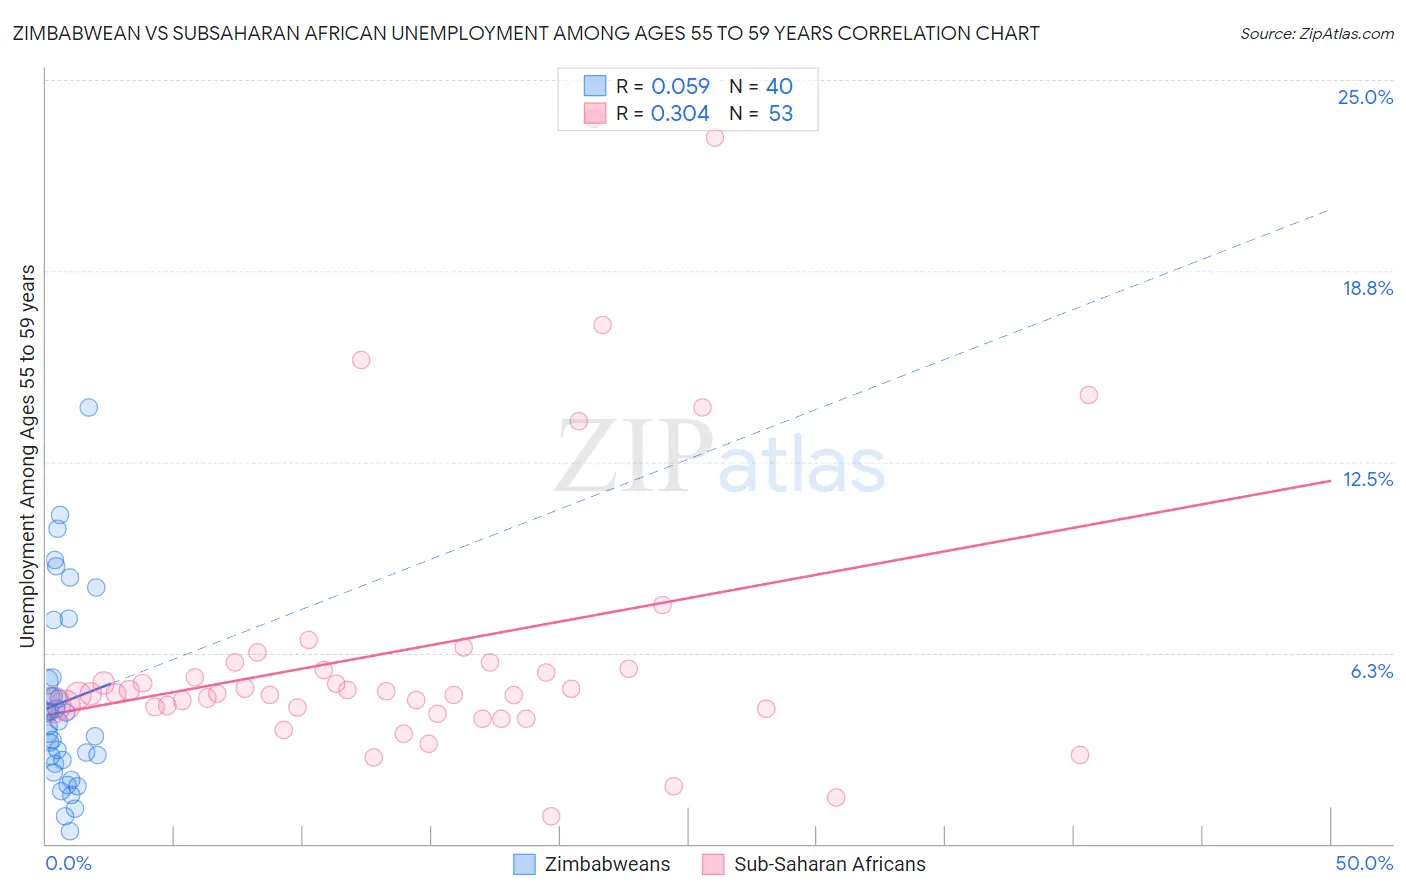 Zimbabwean vs Subsaharan African Unemployment Among Ages 55 to 59 years